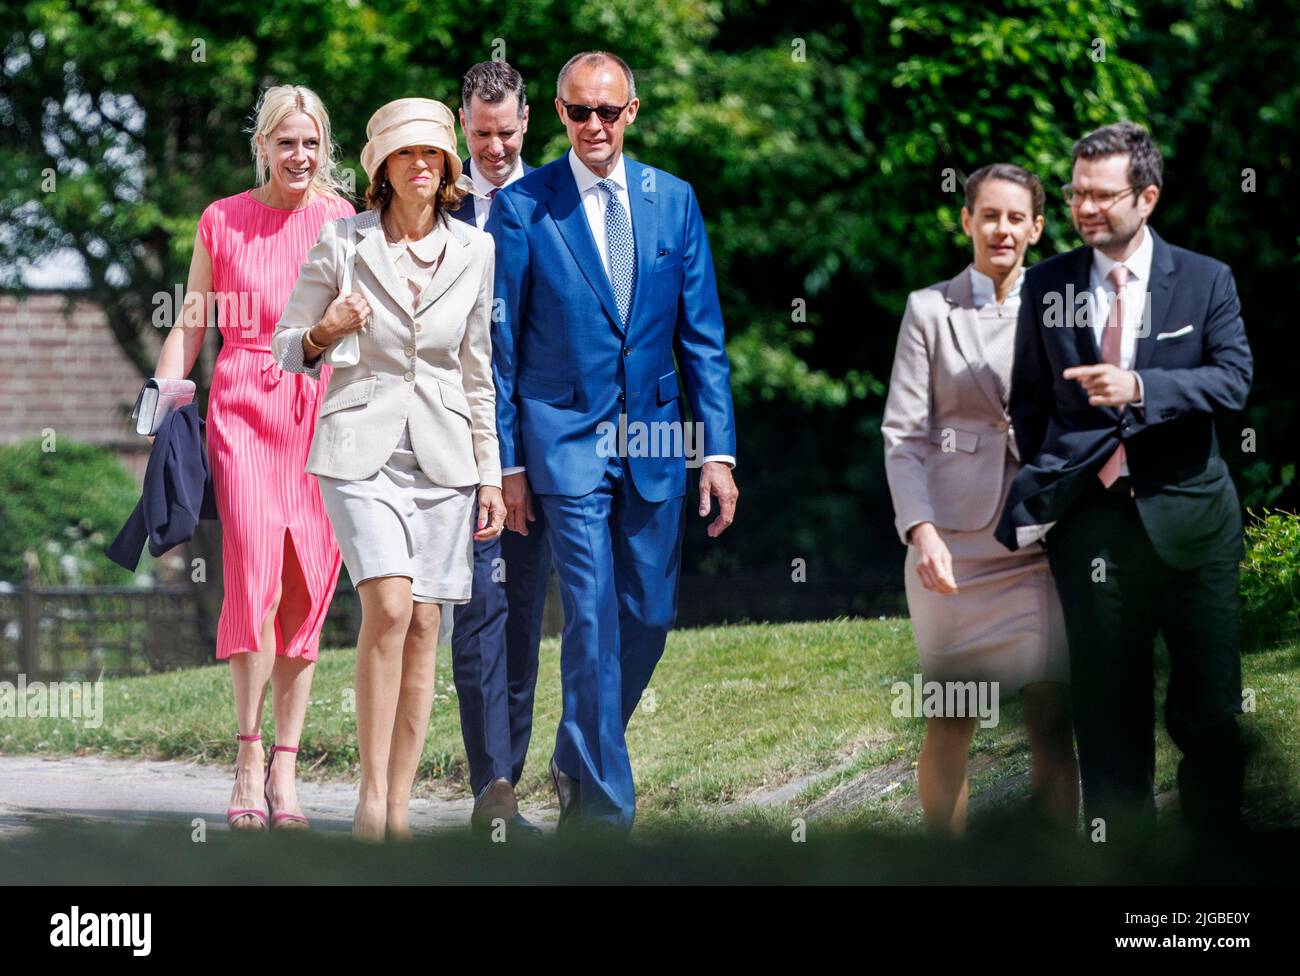 09 July 2022, Schleswig-Holstein, Keitum/Sylt: CDU Chairman Friedrich Merz (r) and his wife Charlotte arrive at St. Severin Church, where he and his wife are to be married. Lindner married his partner Lehfeldt in a civil ceremony on July 07, 2022 on the island of Sylt. Photo: Axel Heimken/dpa Stock Photo